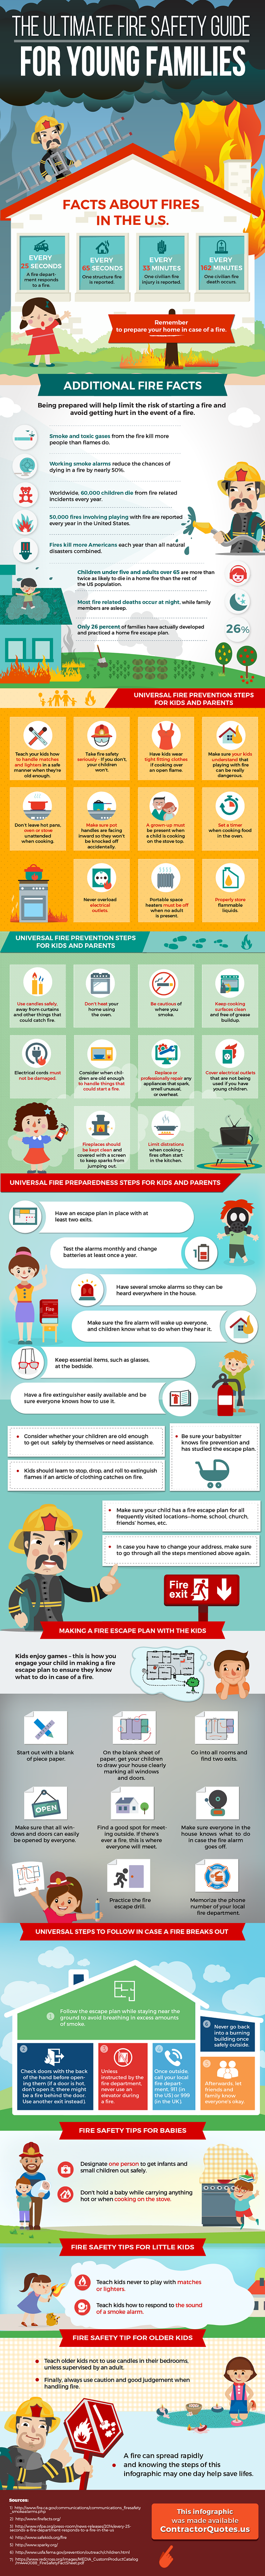 fire safety for kids infographic.png